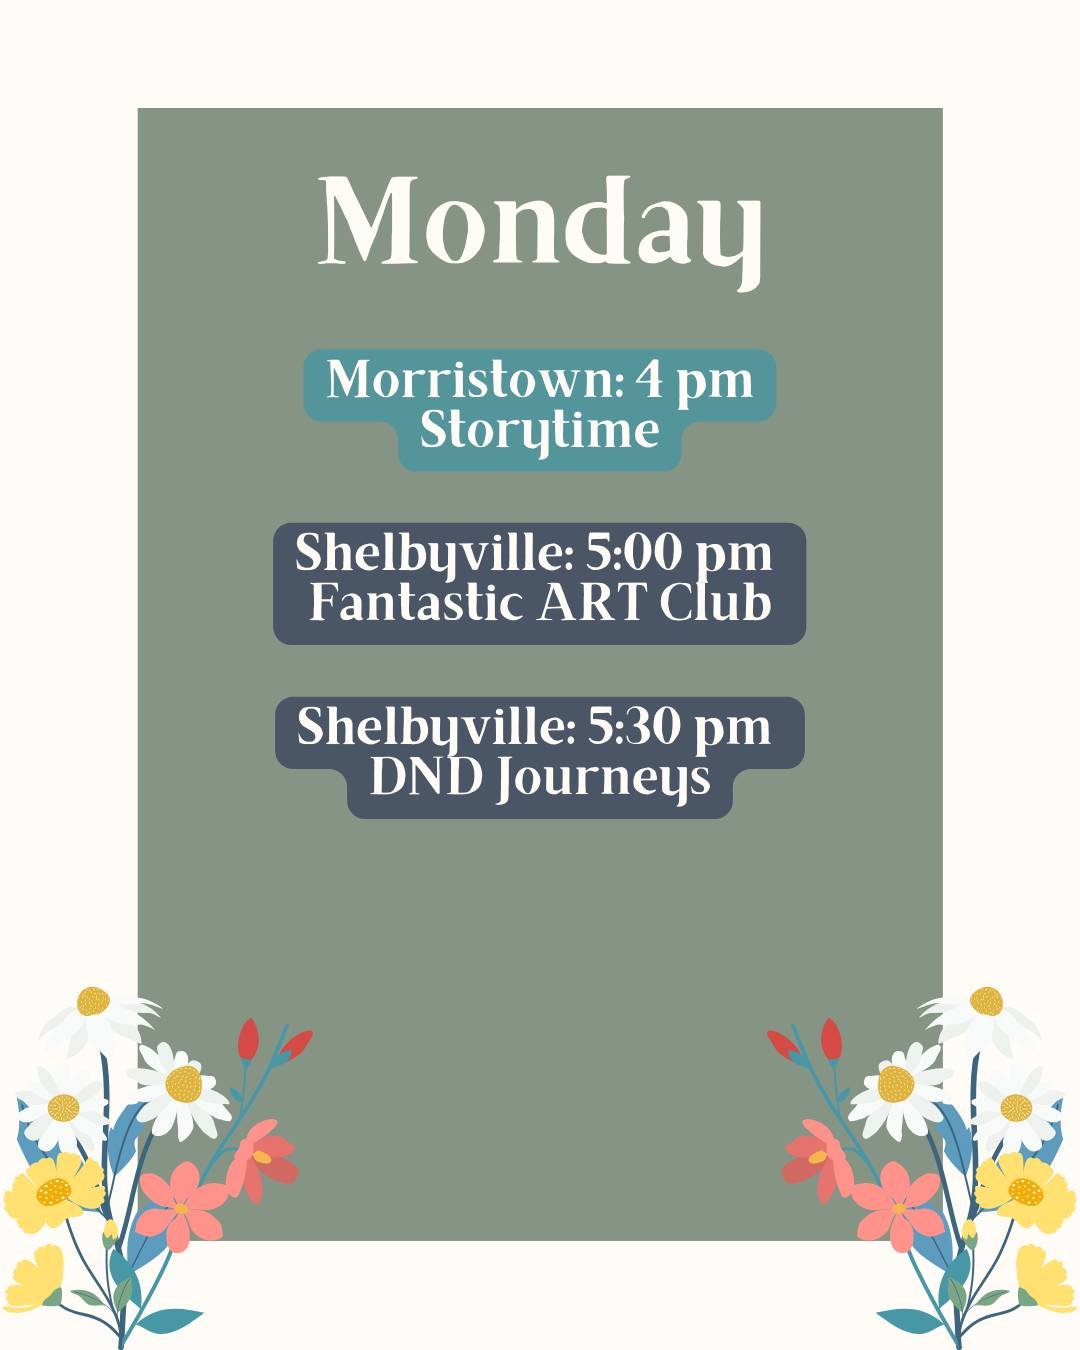 It is Sunday my dudes and it is time for your overview of the week ahead at the library!
What are some of your favorite Library programs?
.
.
.
#Fyp #Shelbyvilleindiana #indiana #Library #Fun #Friends #Family #Local #Books #Reading #planner #Learning